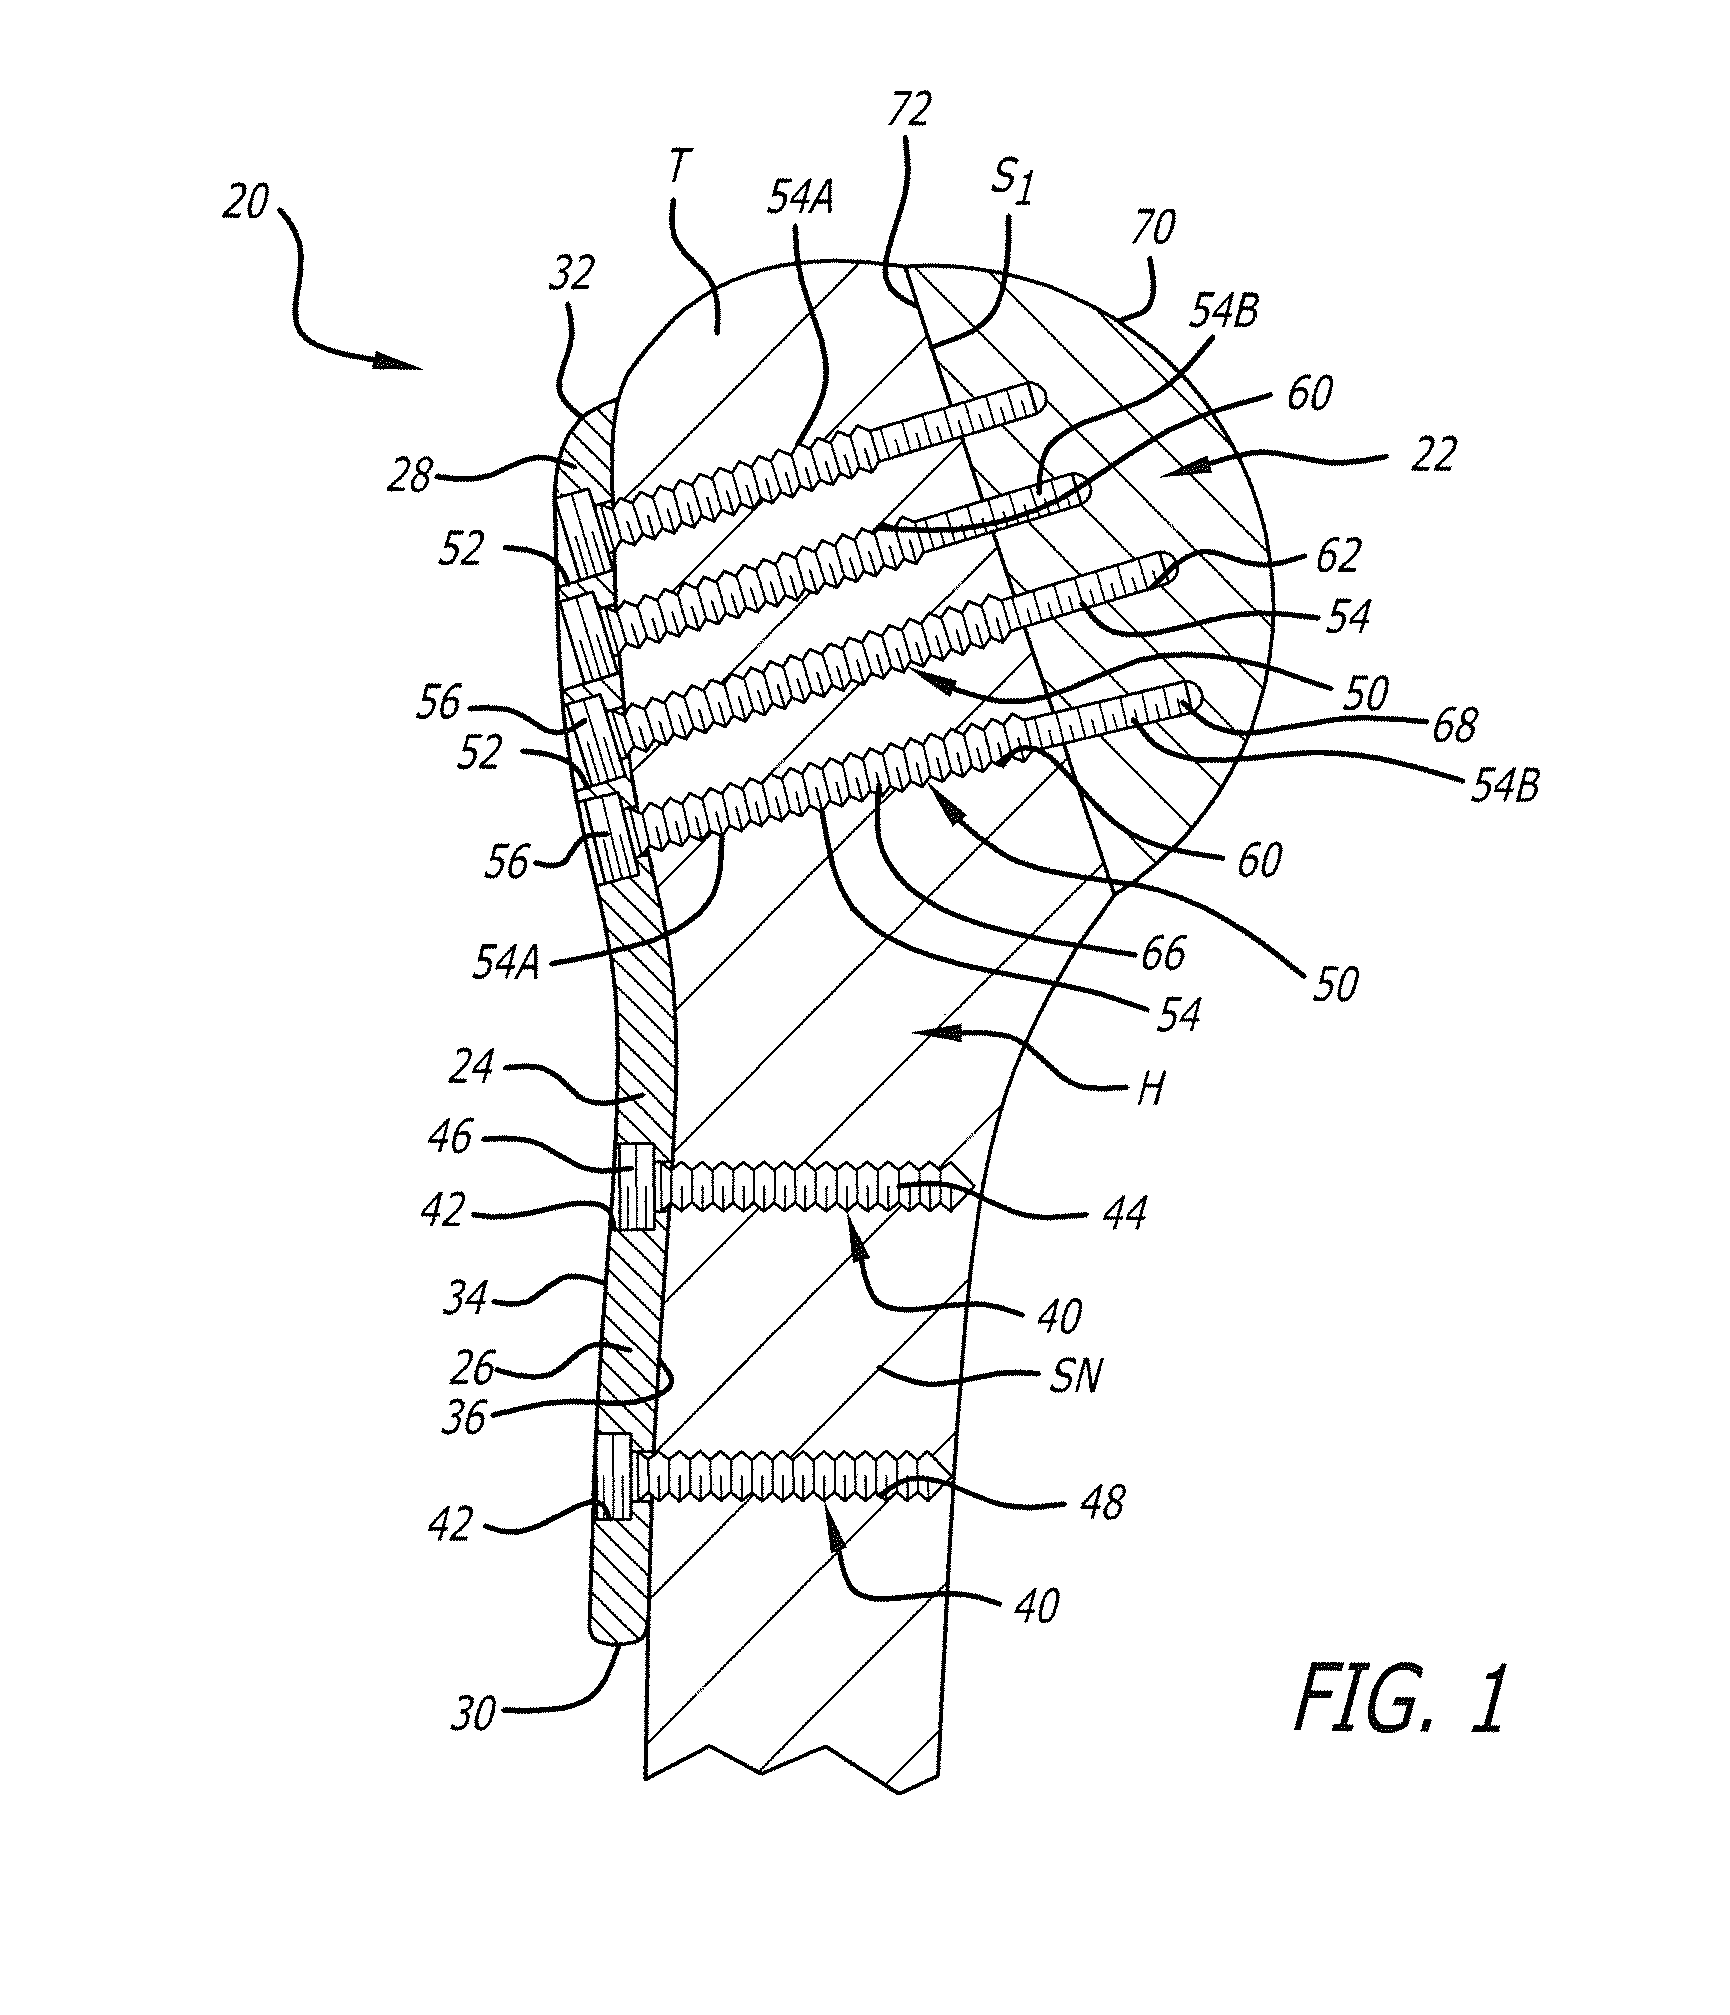 System and method for fracture replacement of comminuted bone fractures or portions thereof adjacent bone joints